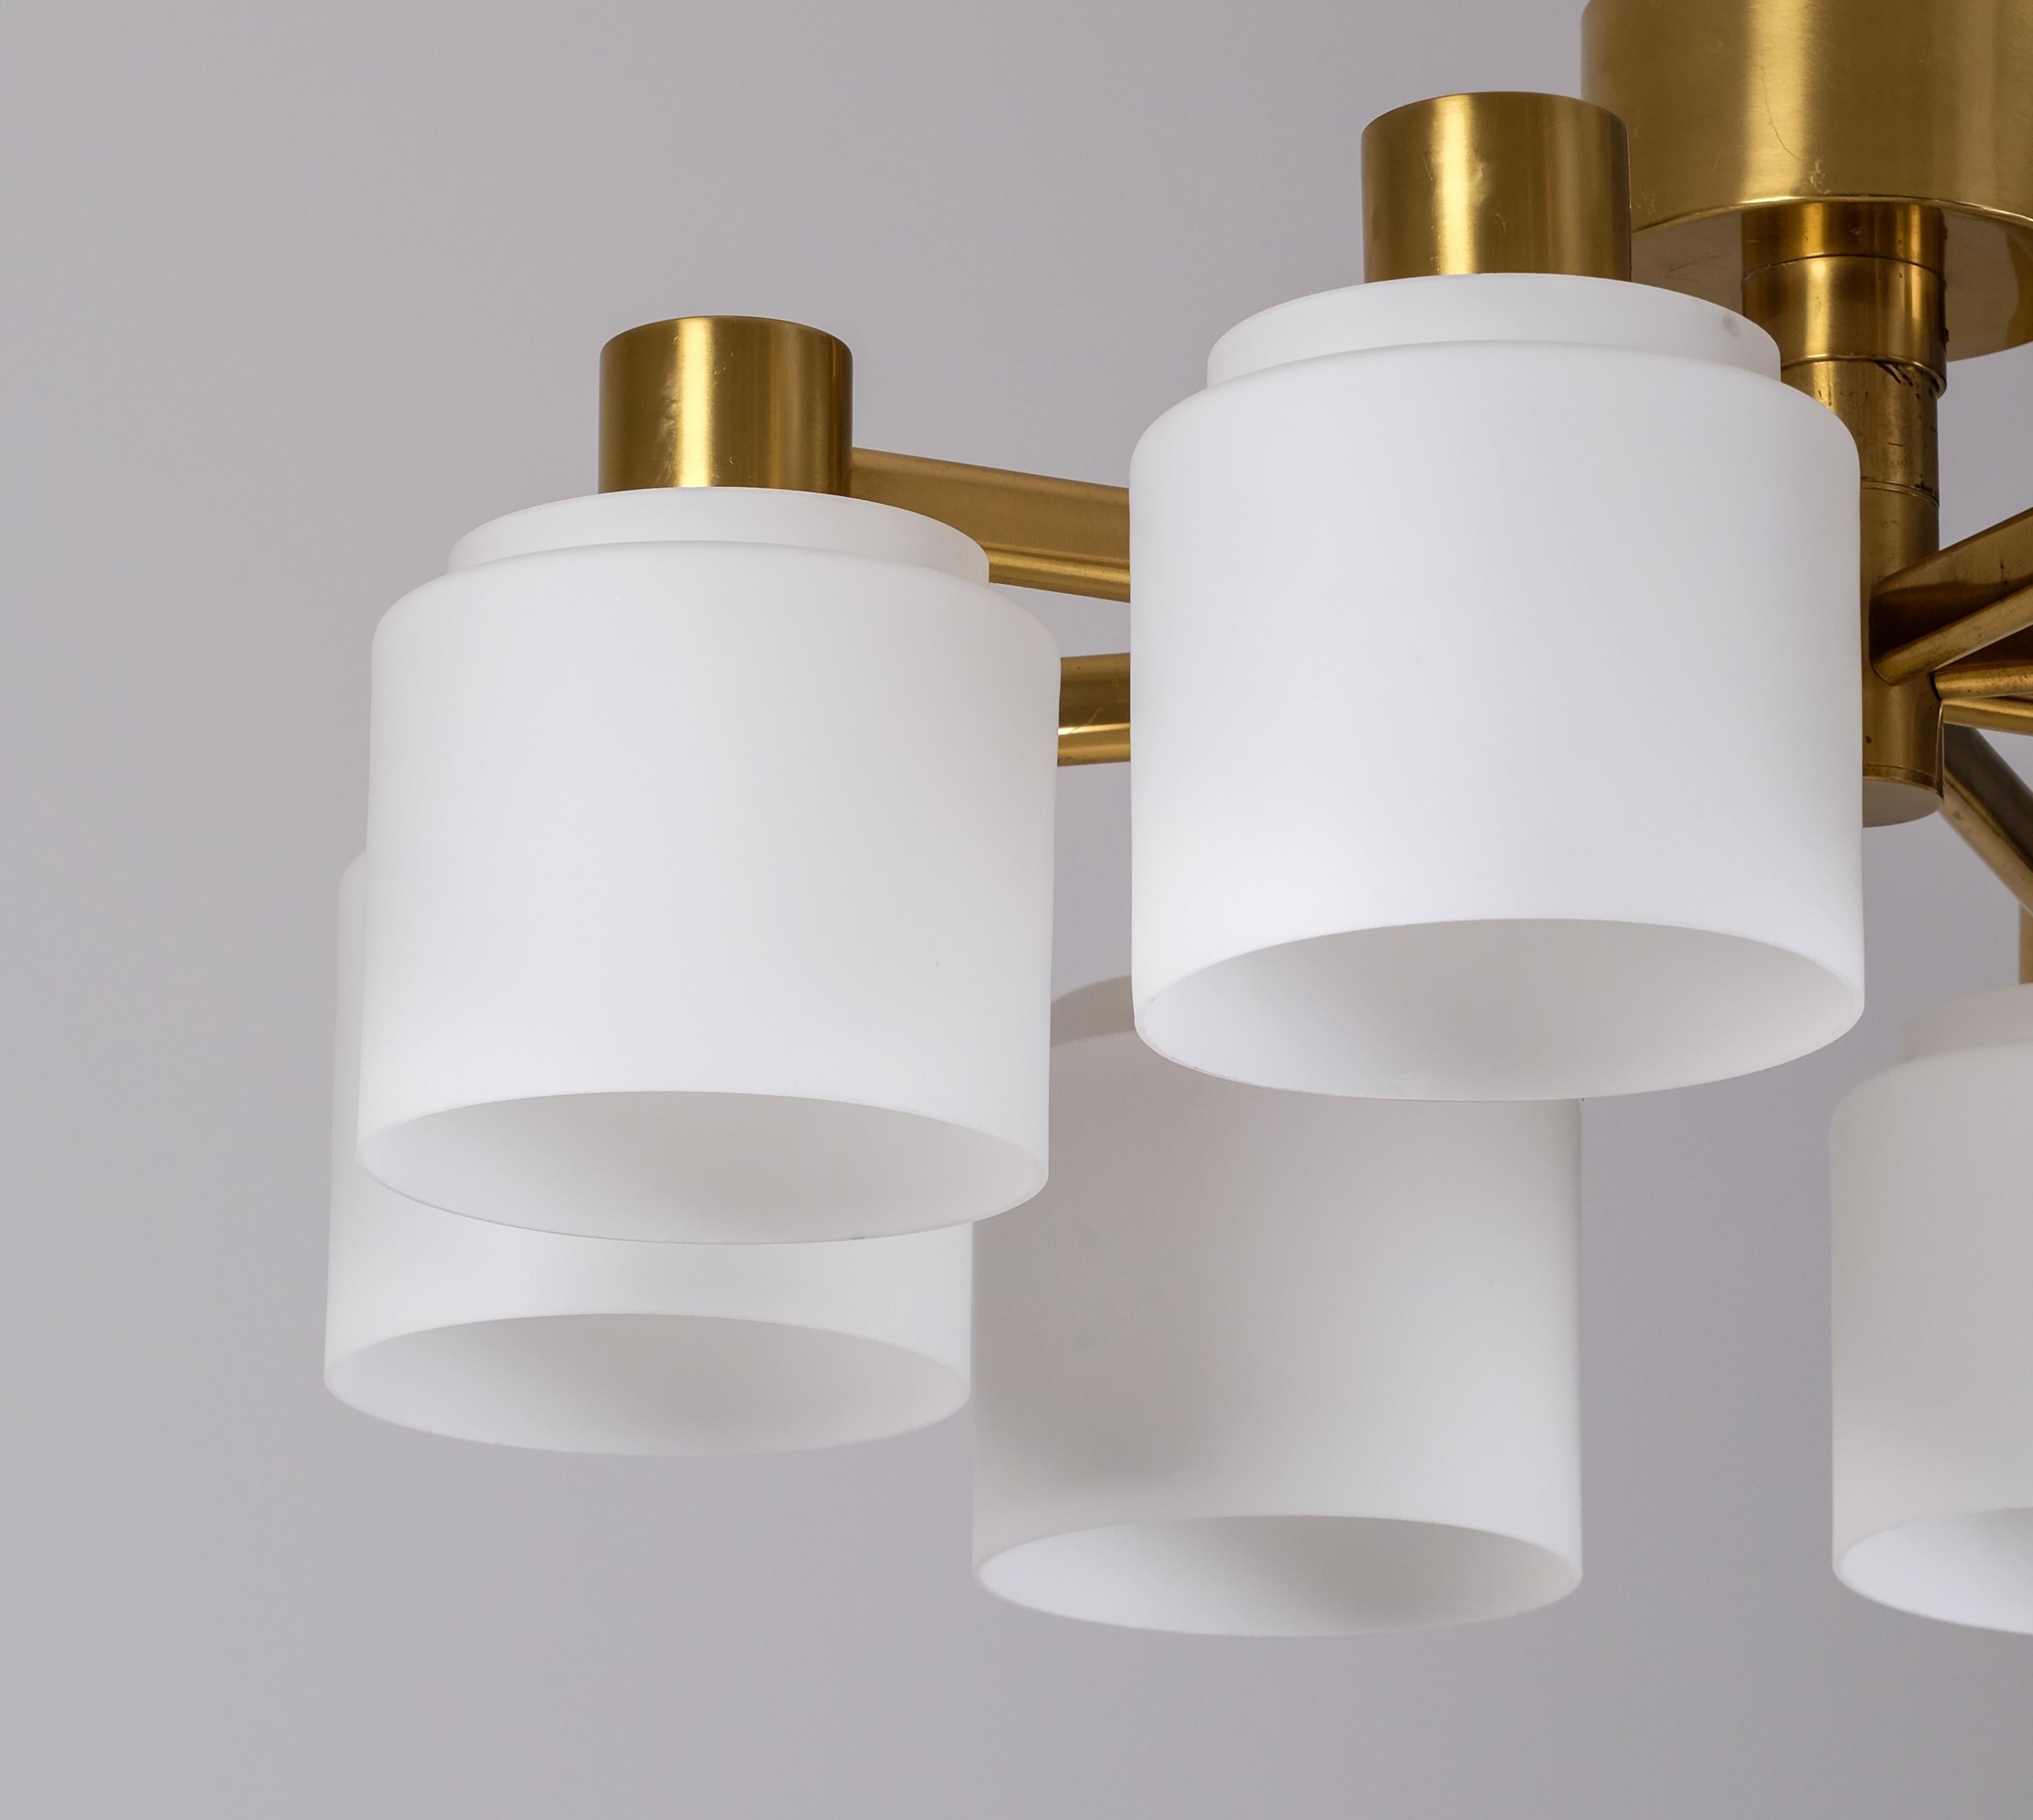 Mid-20th Century Set of 3 Swedish Ceiling Lights by Boréns, Sweden, 1960s For Sale